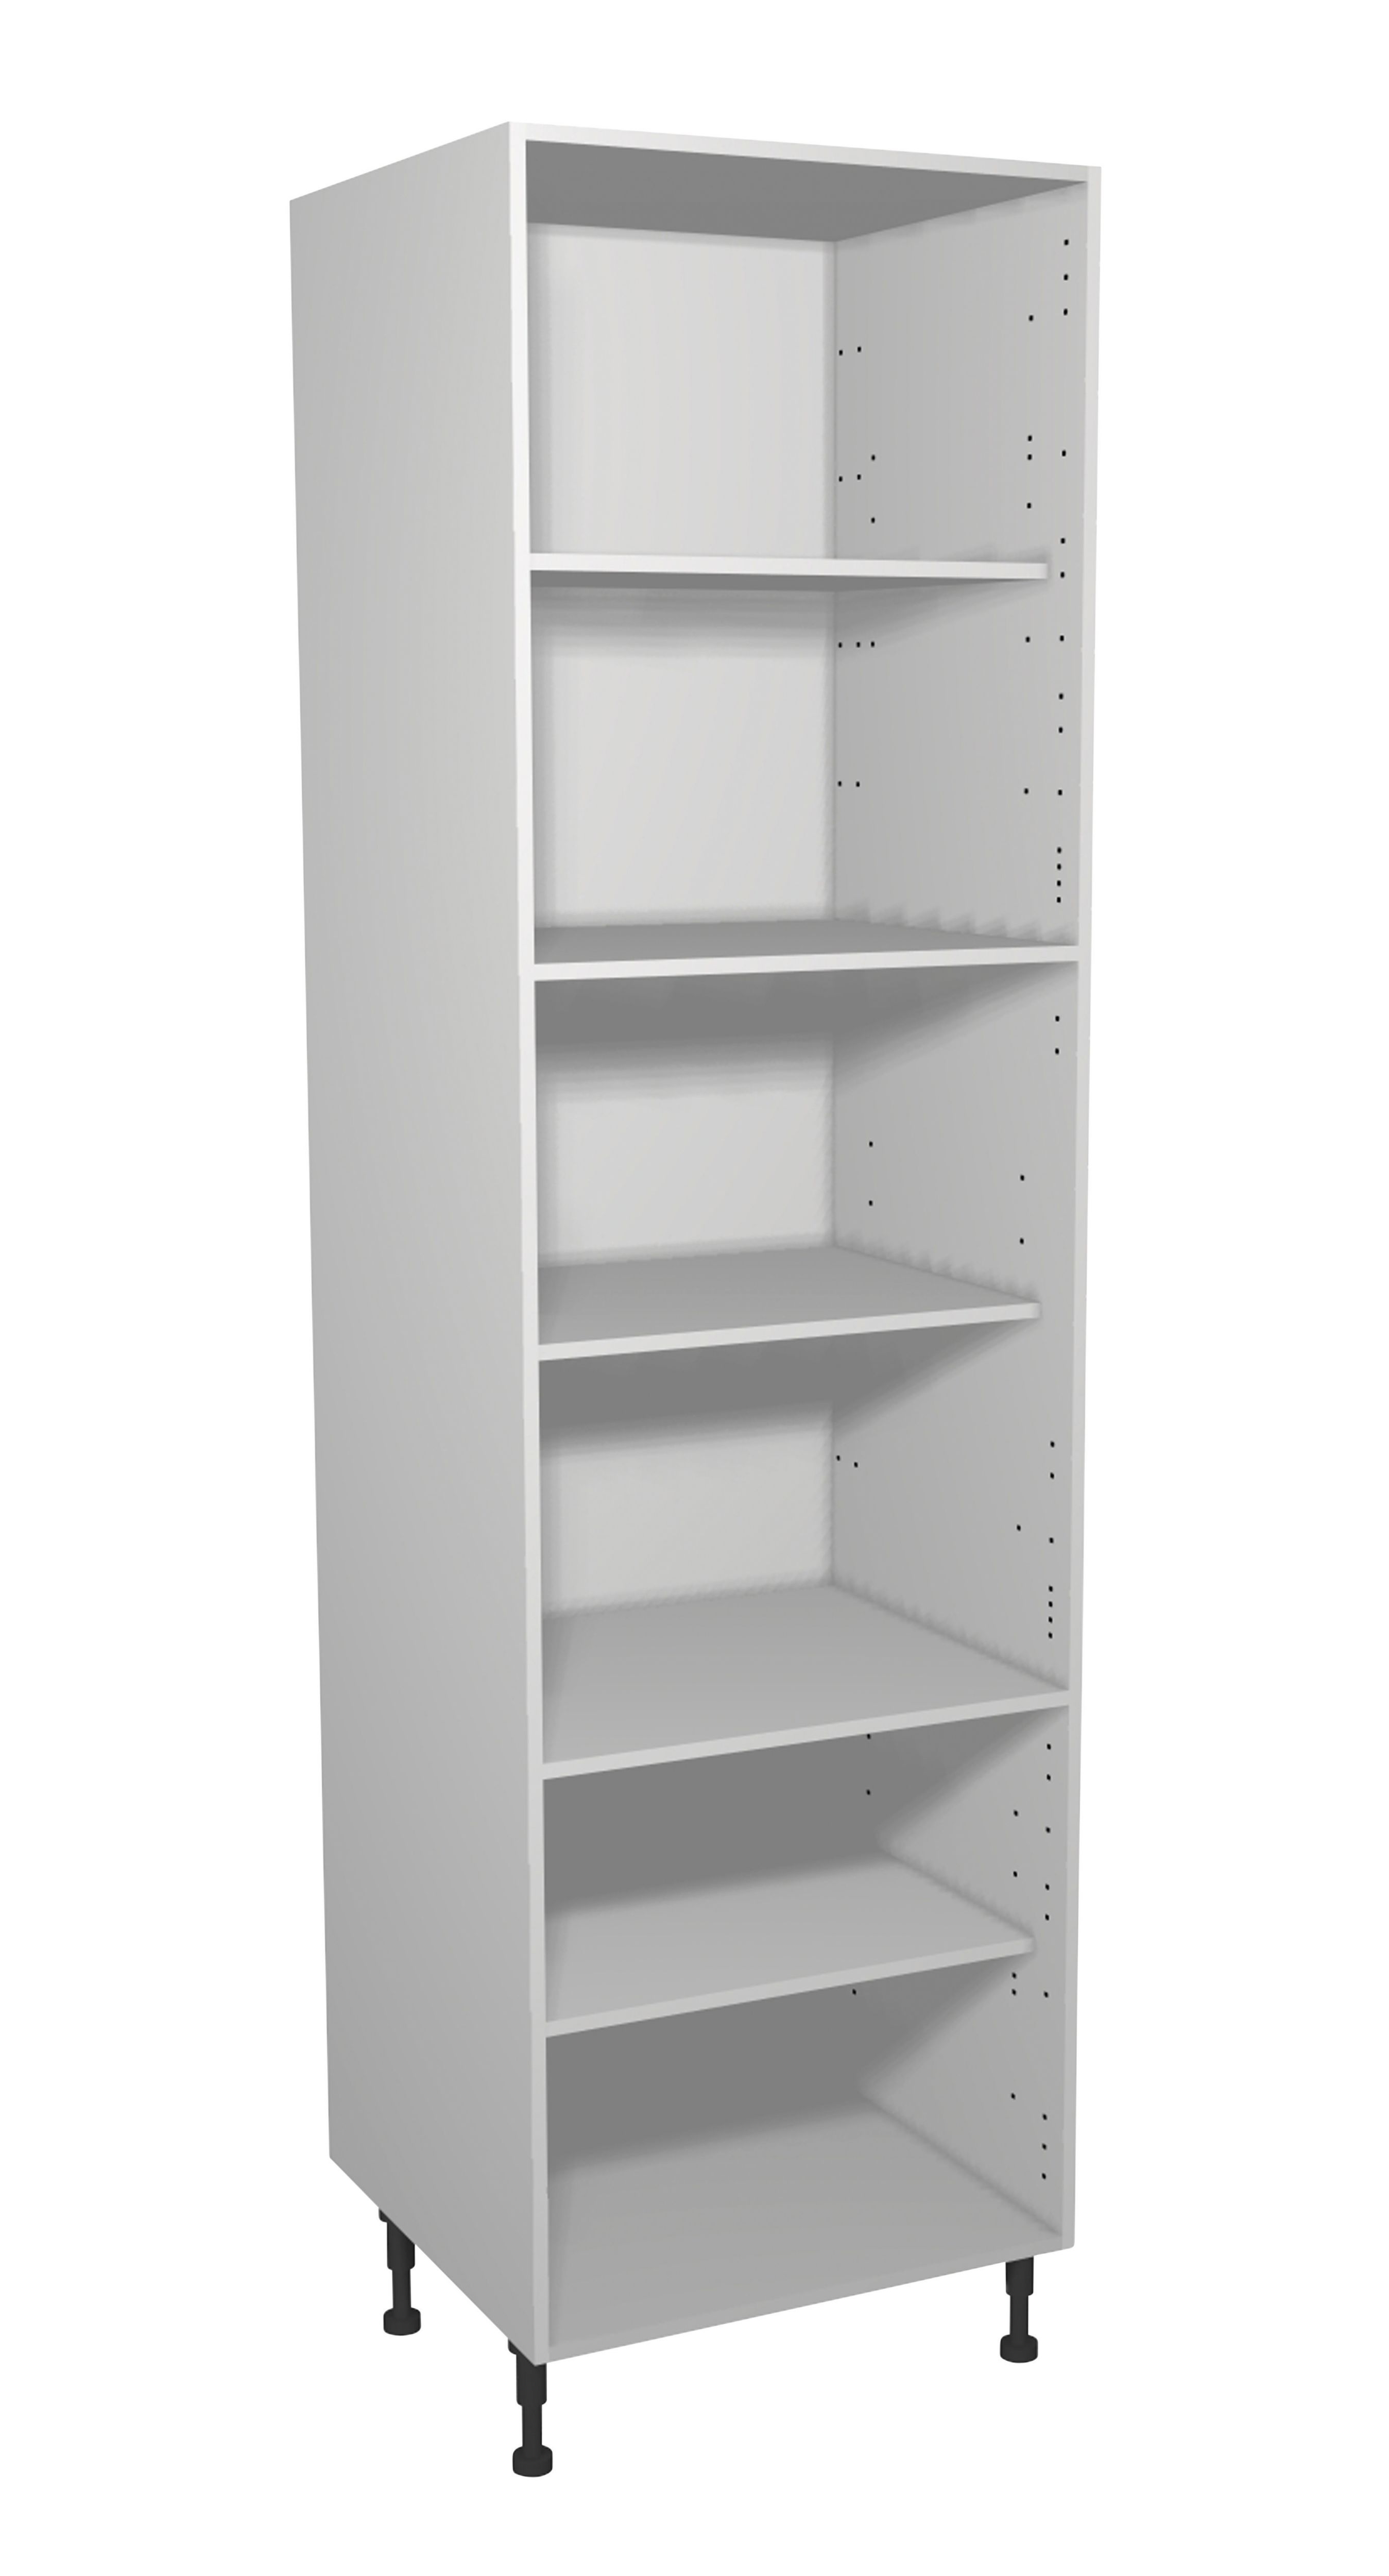 Image of Wickes Universal Larder/Appliance Tower - 600mm